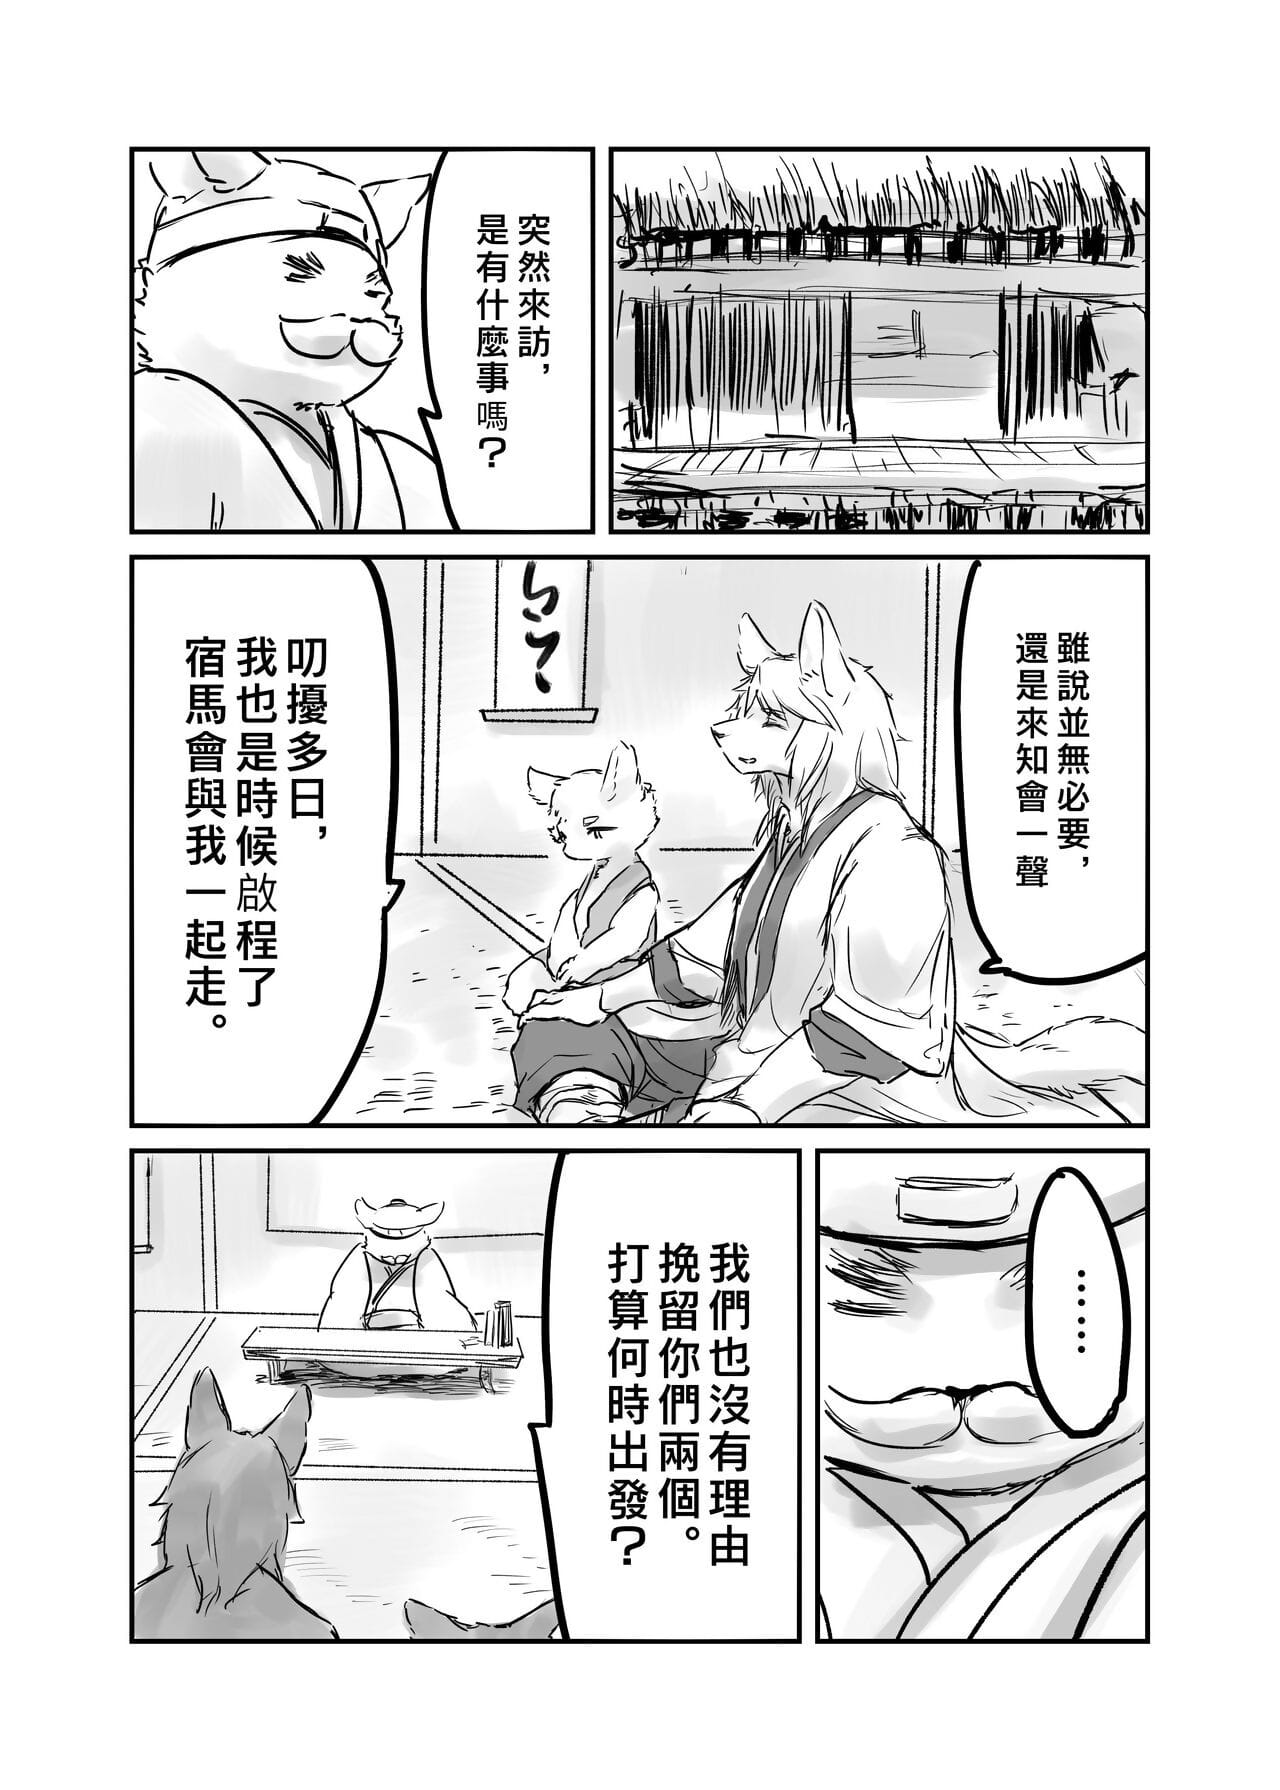 （the visiteur 他乡之人 by：鬼流 PARTIE 2 page 1